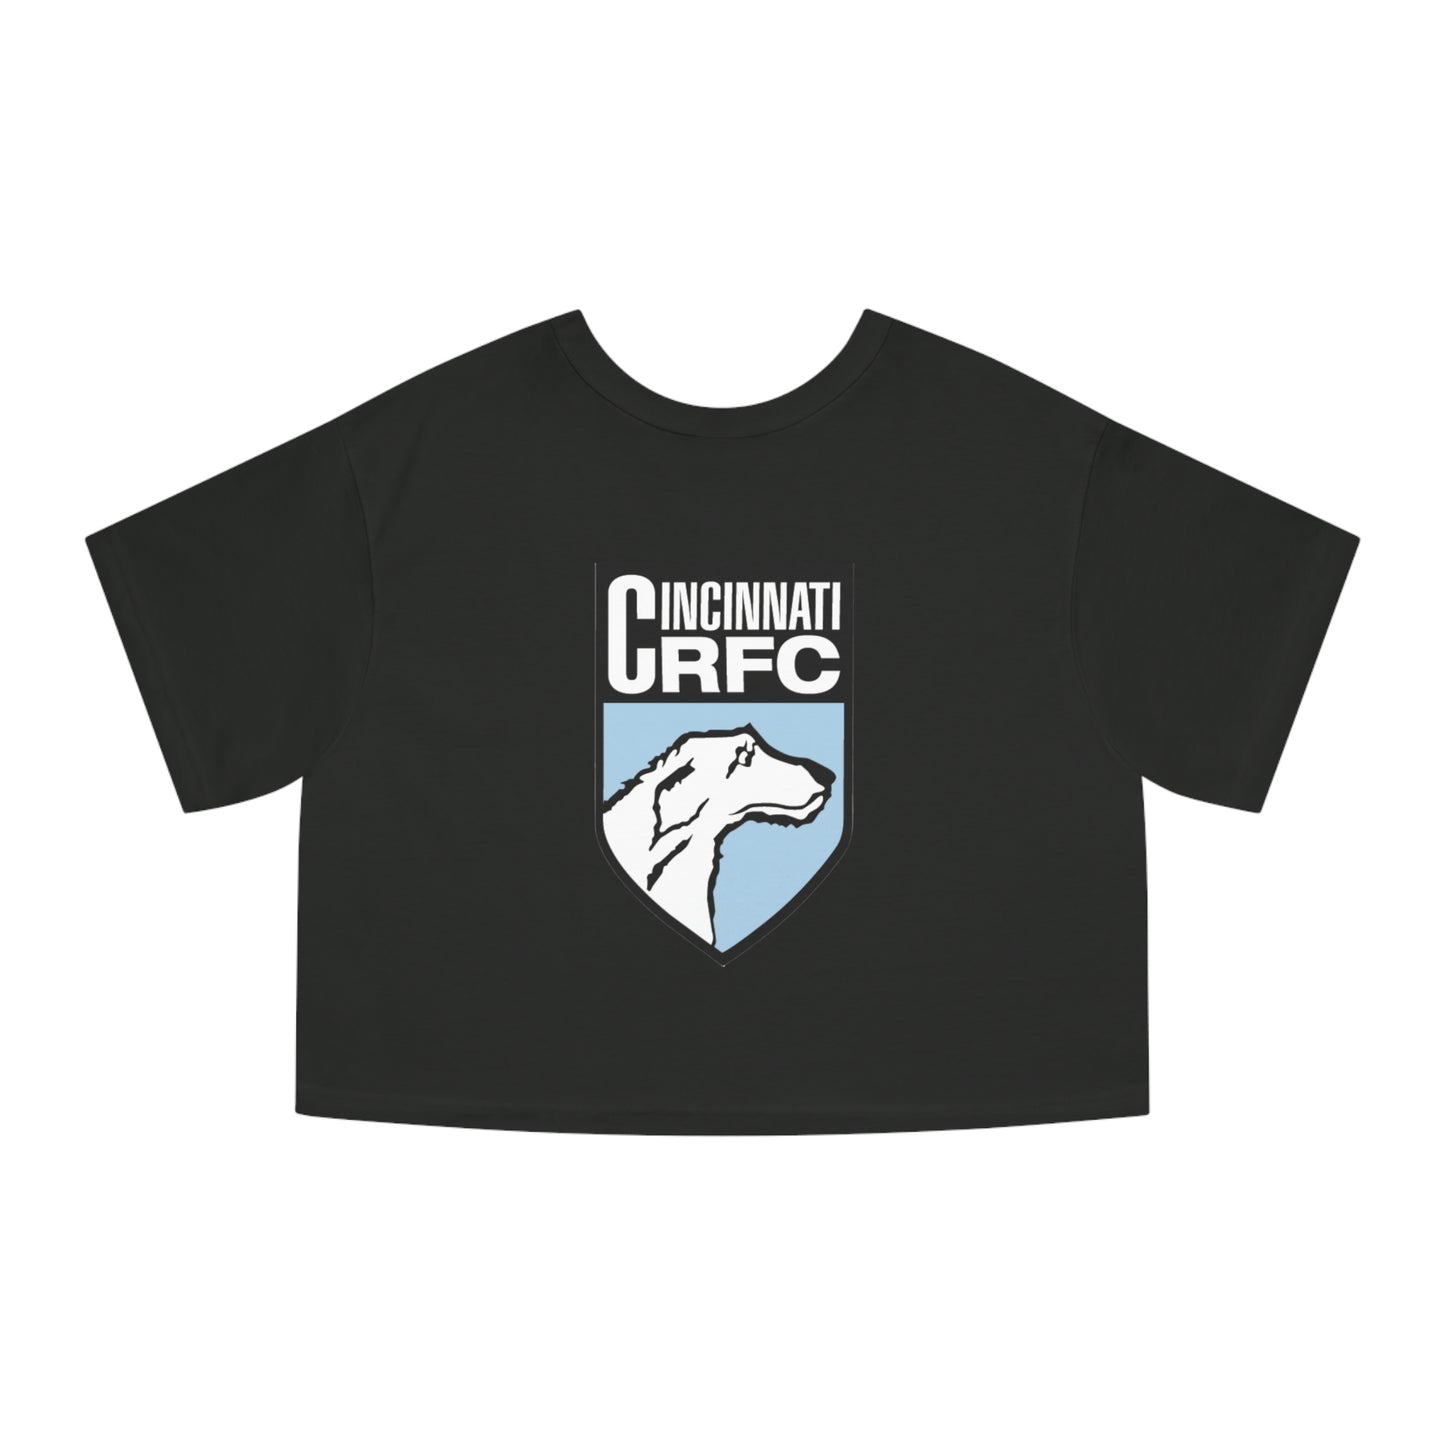 Champion Heritage Crop Top | CRFC Wolfhounds Blue Crest